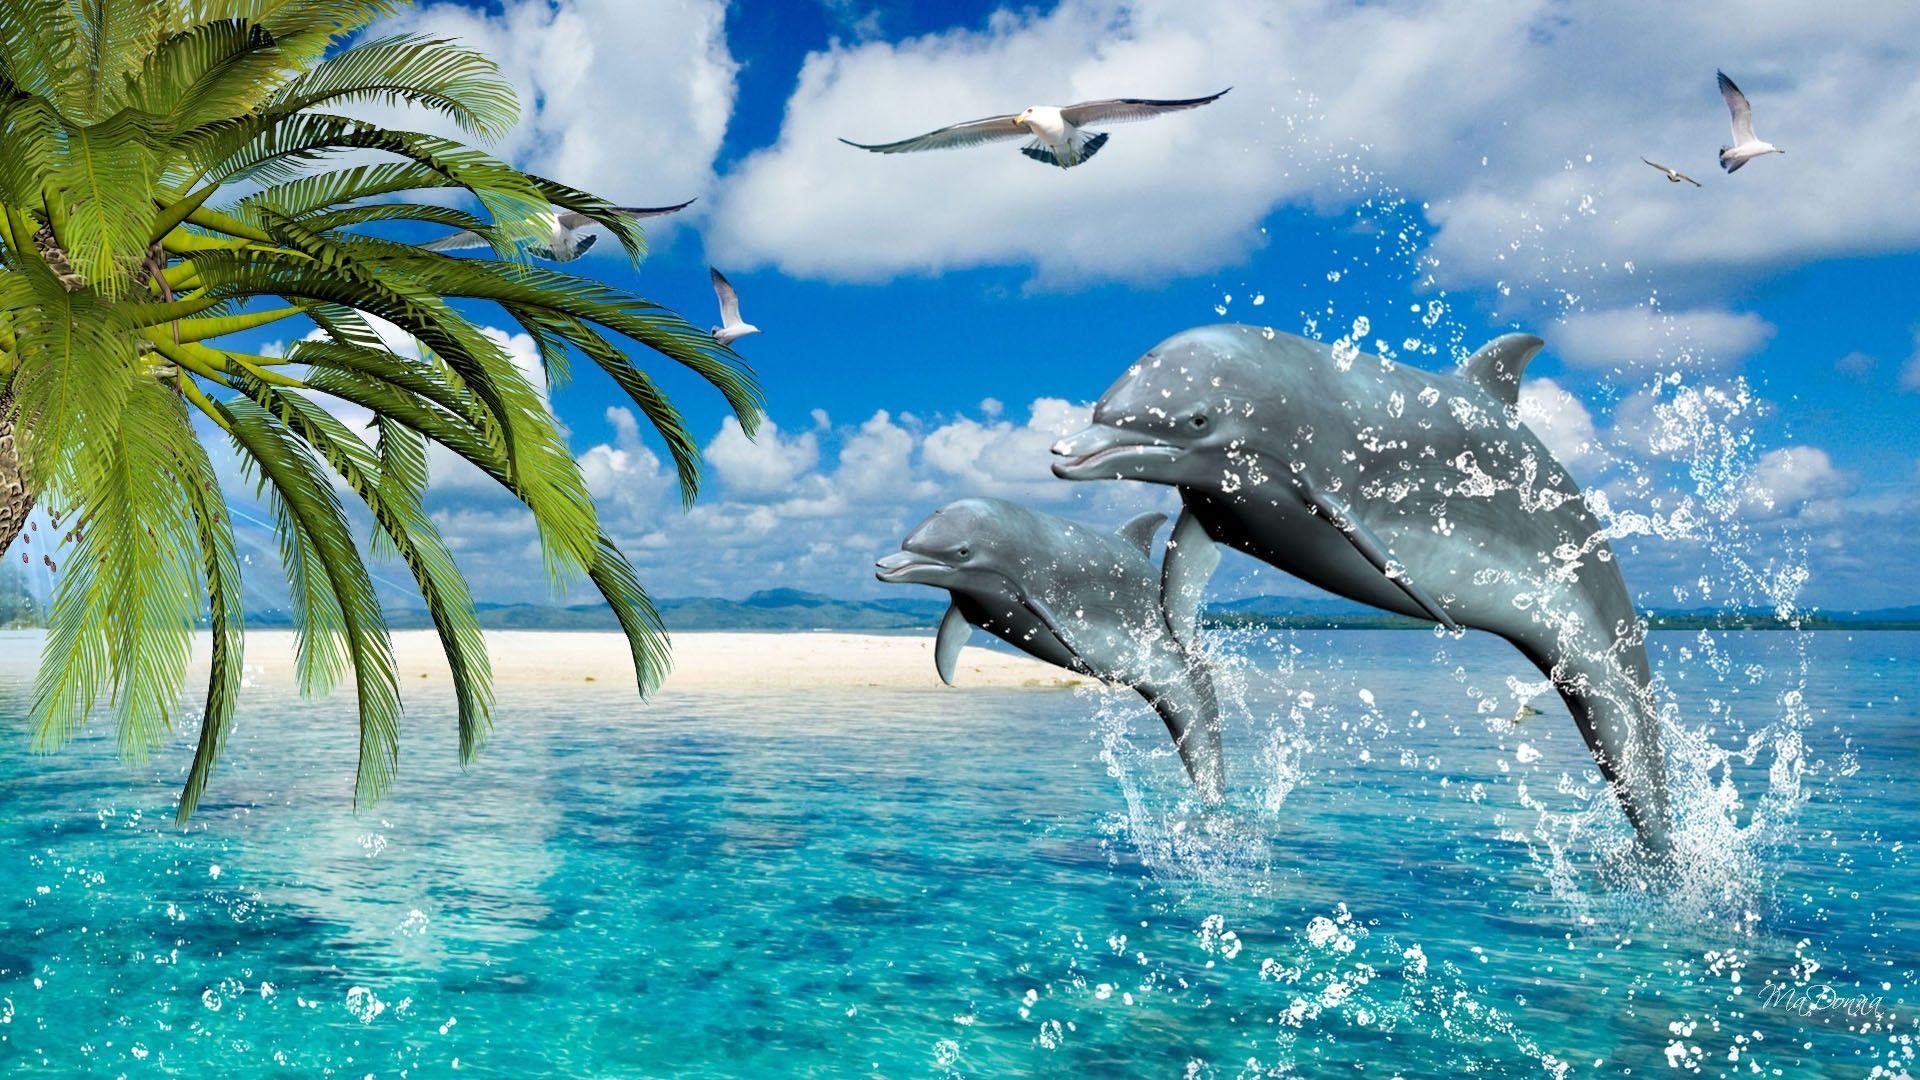 Cute Dolphin Background Images HD Pictures and Wallpaper For Free Download   Pngtree